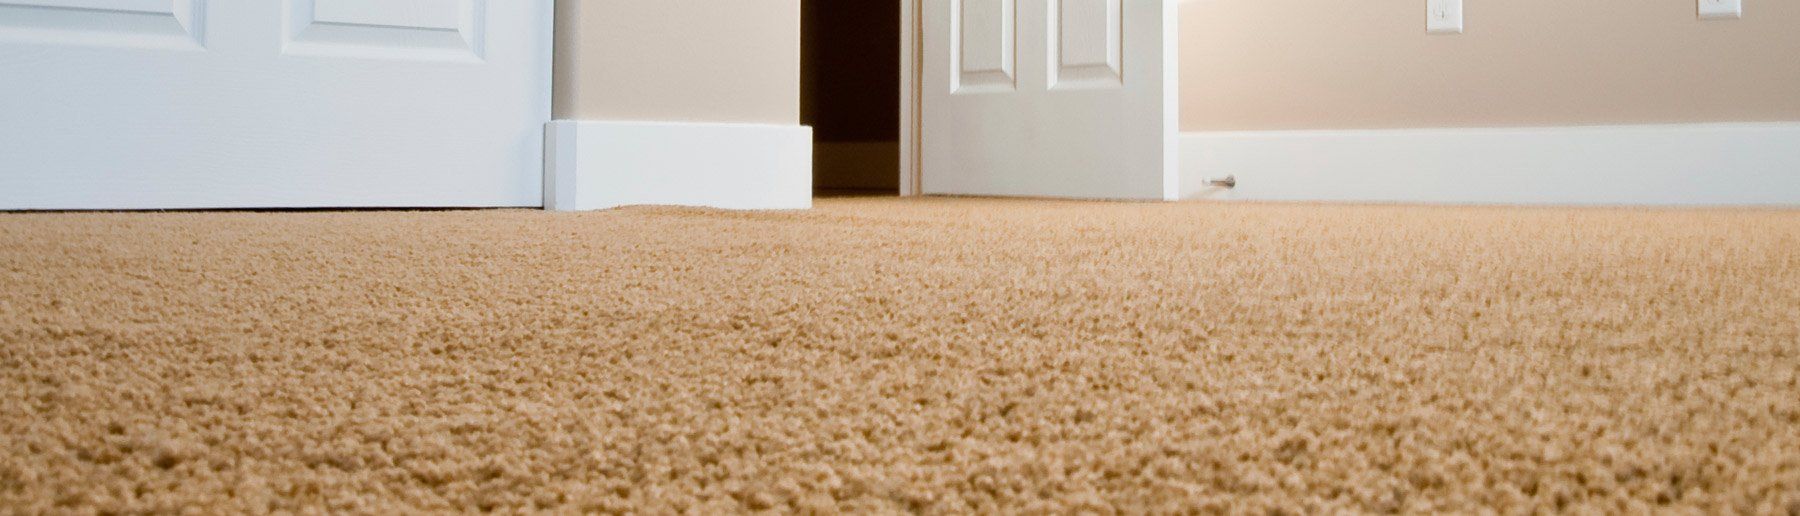 House Cleaning — Clean Carpet in North Charleston, SC